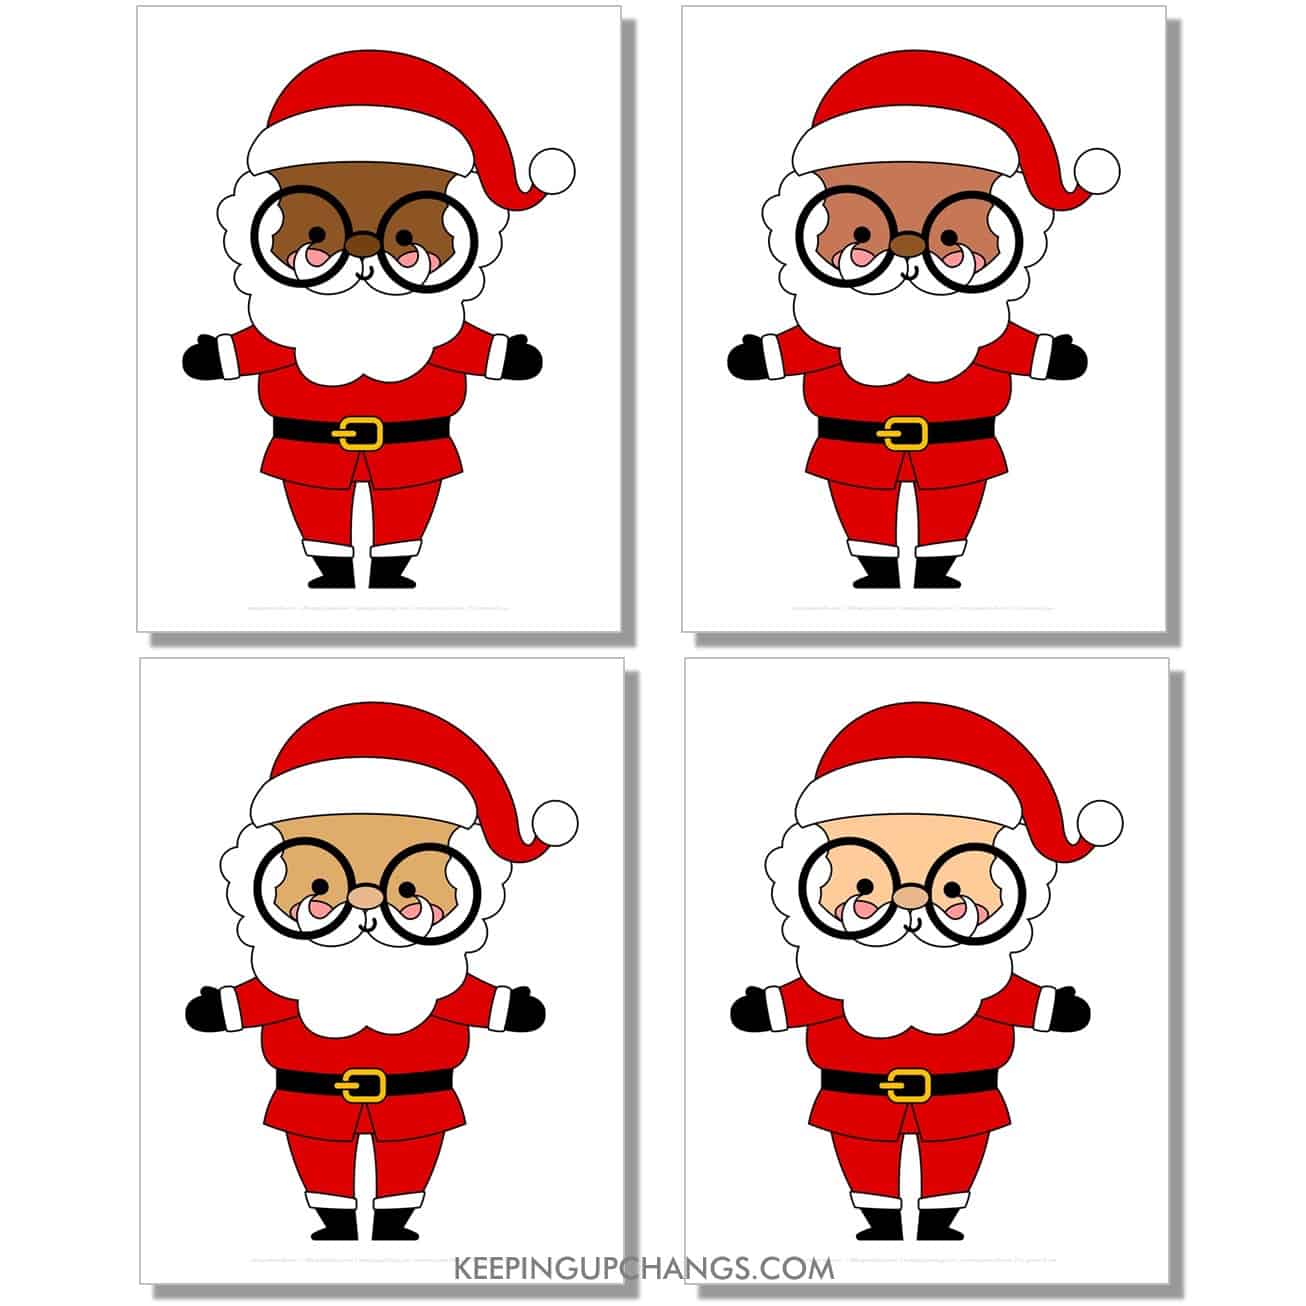 free big, large glasses santa outline, cut out template in color, red, black, white for light, medium, dark skin tones, races.